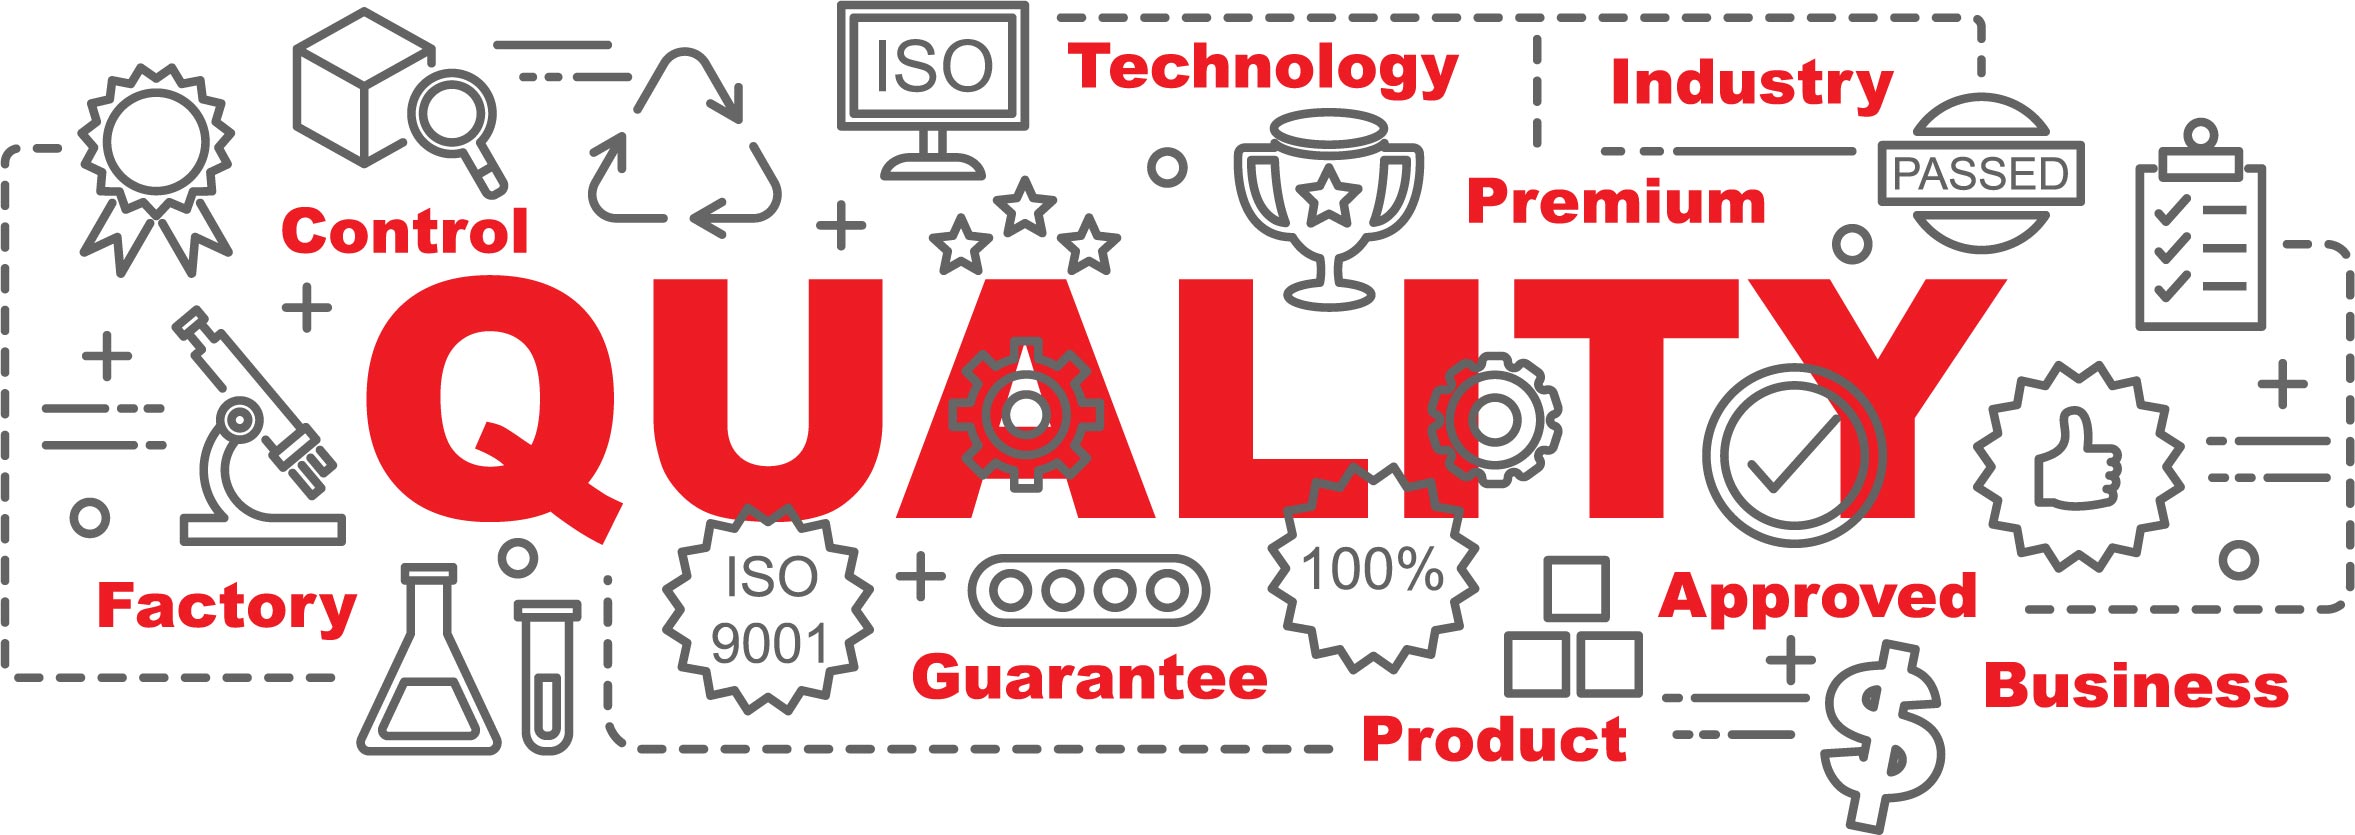 100% quality guarantee to employers